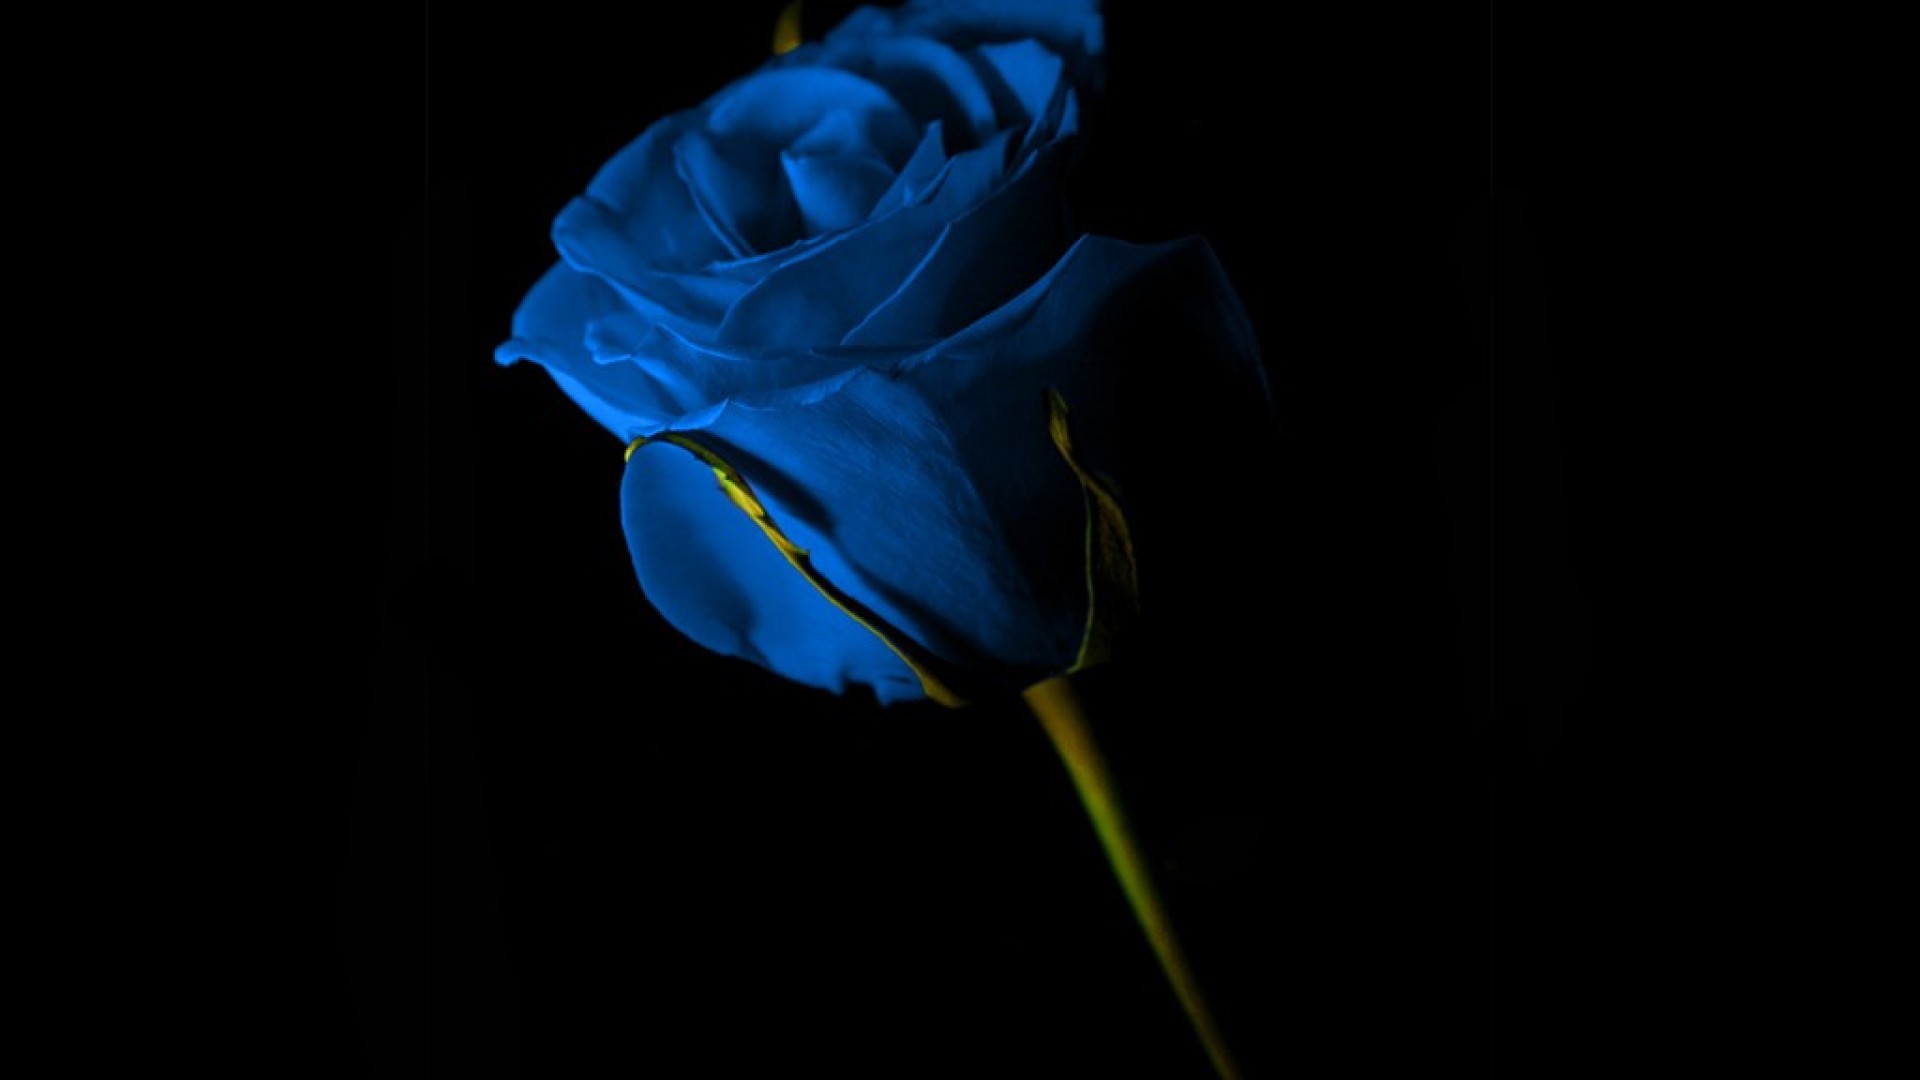 Blue rose on black background wallpapers and images